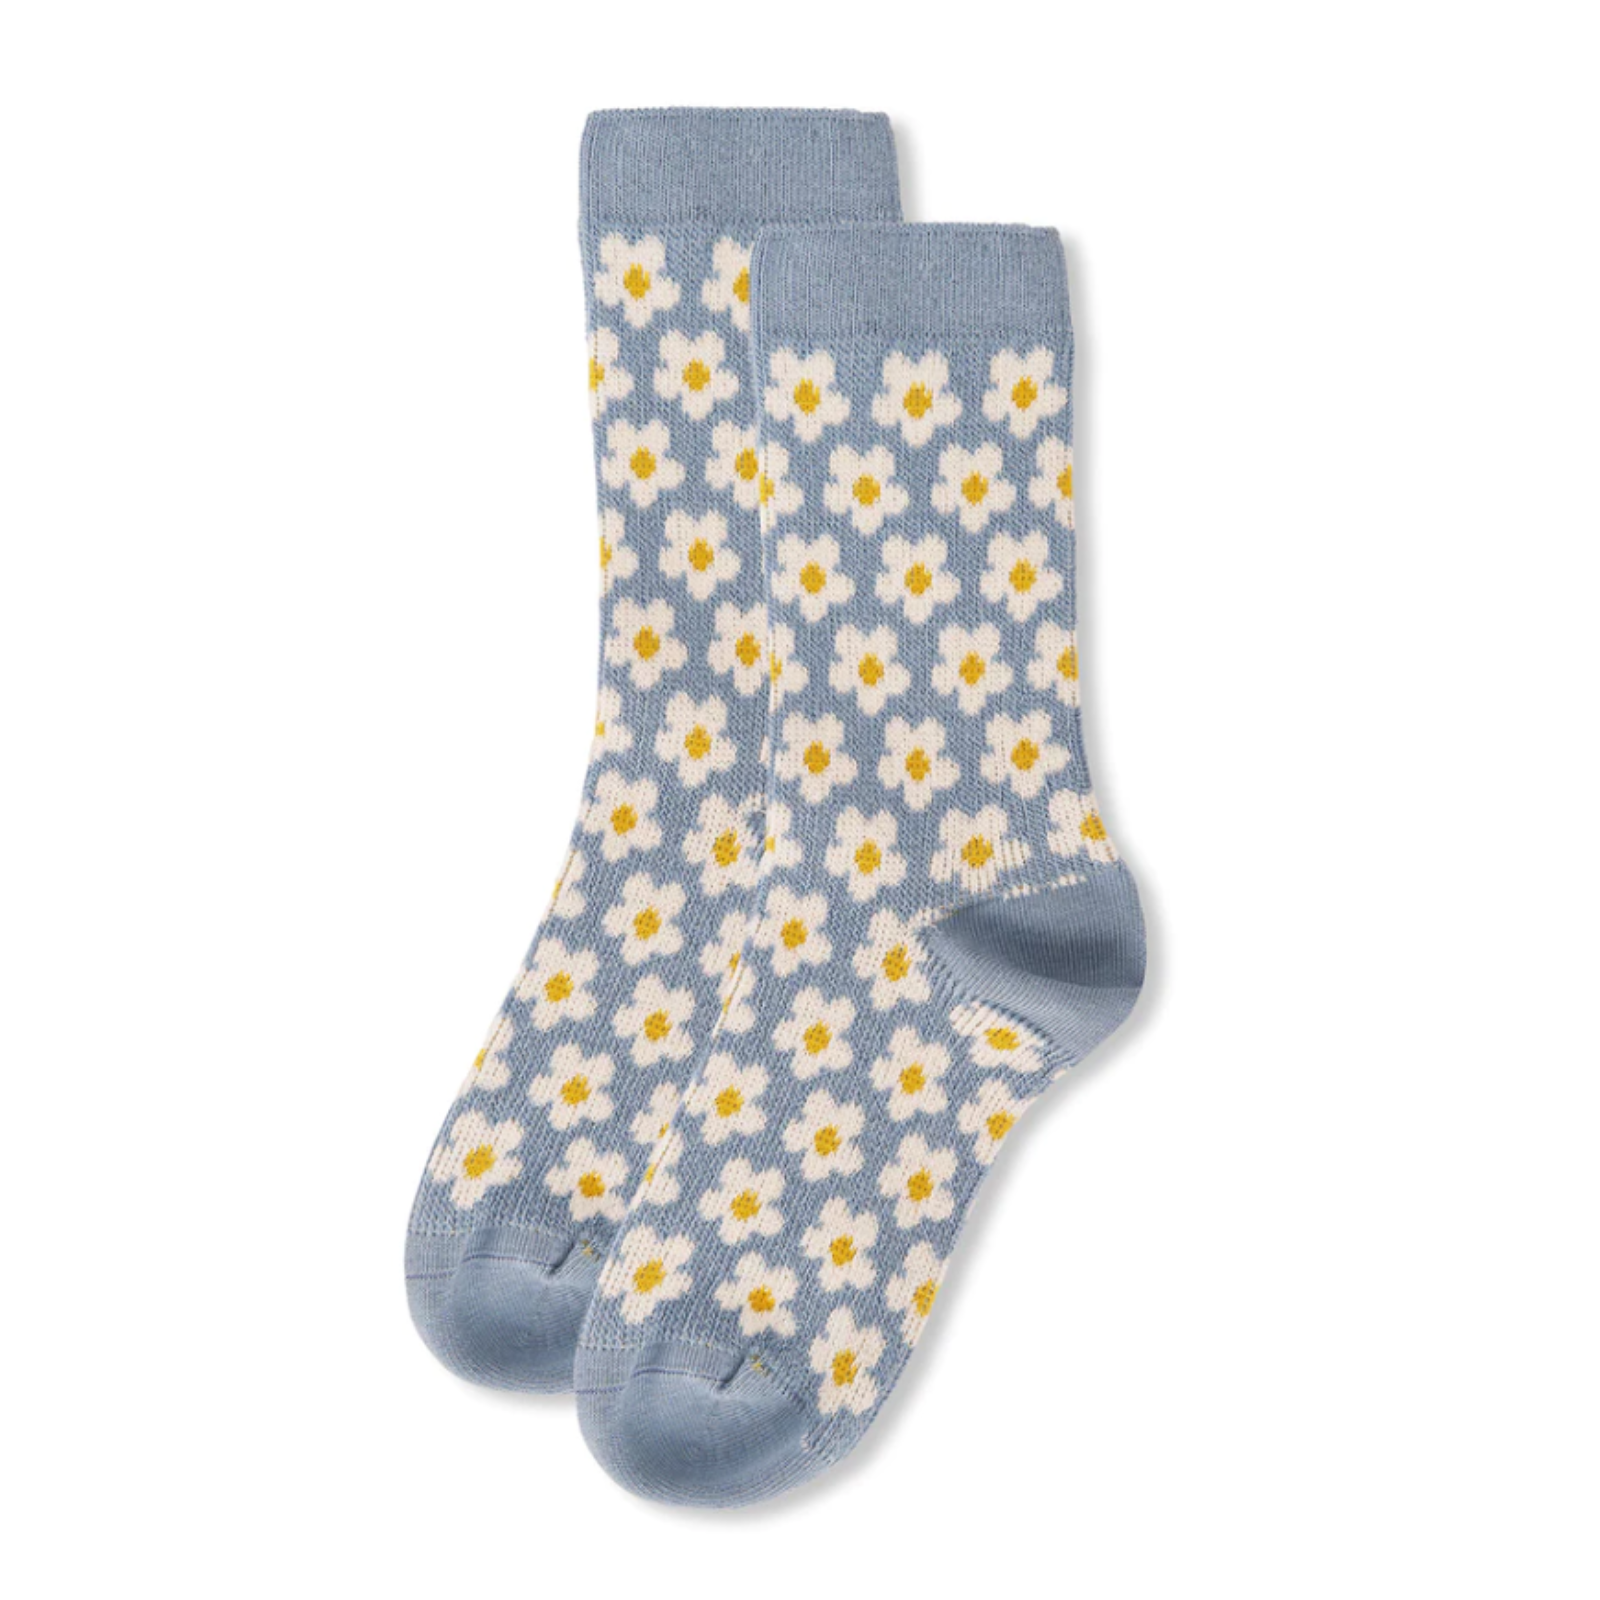 MeMoi Mod Sweet Daisy Crew women's sock featuring light blue sock with white Daisys all over on display as a pair